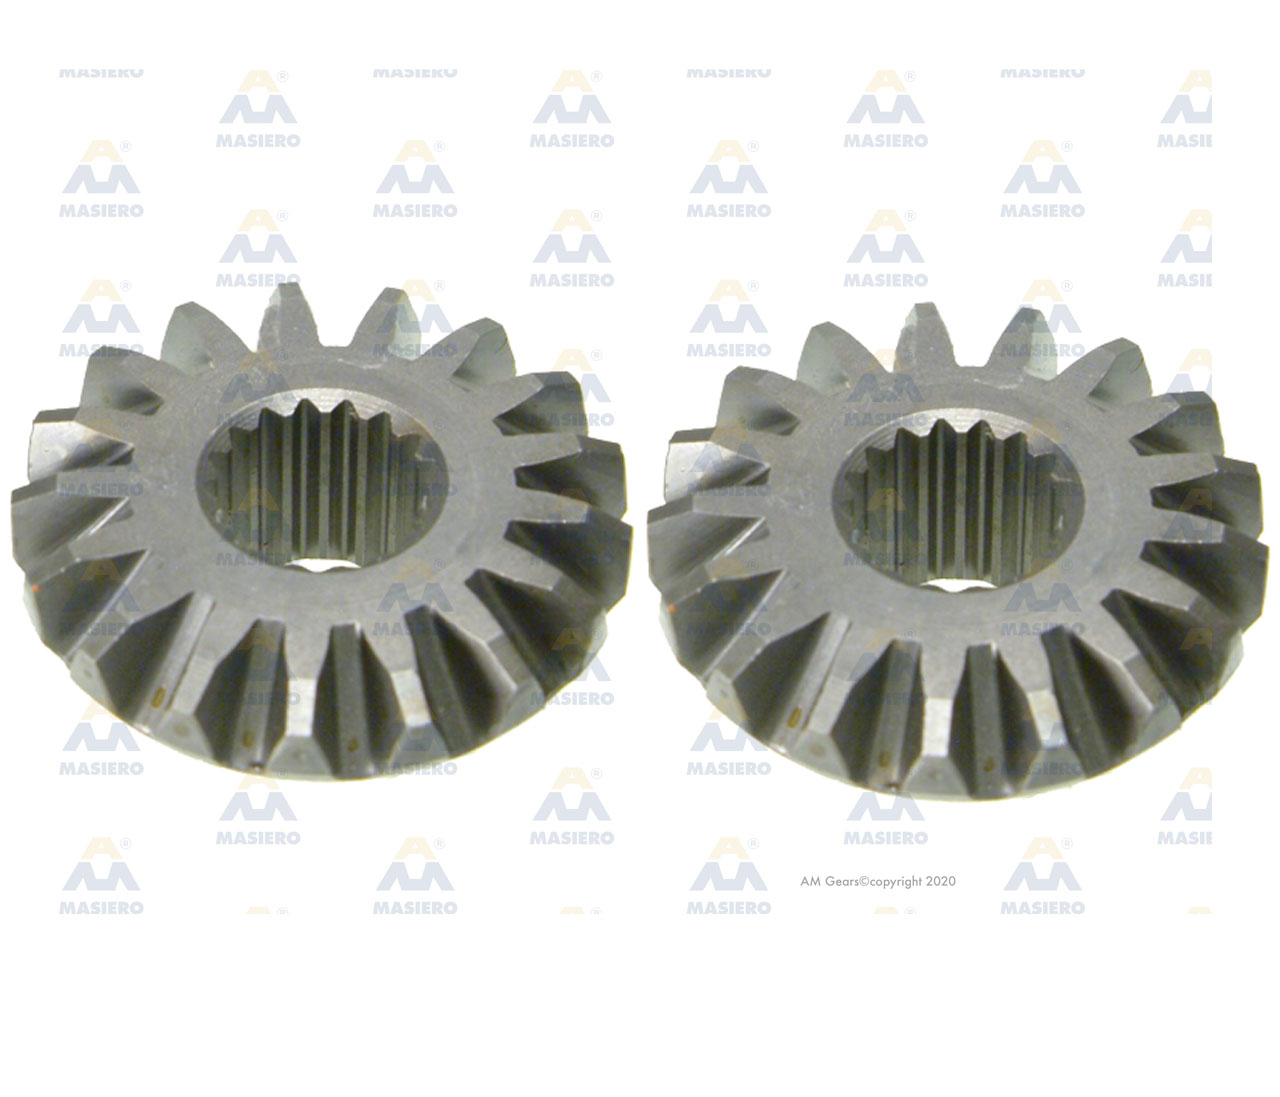 SIDE GEAR 17-17 T. suitable to G.M. GENERAL MOTORS 97023090